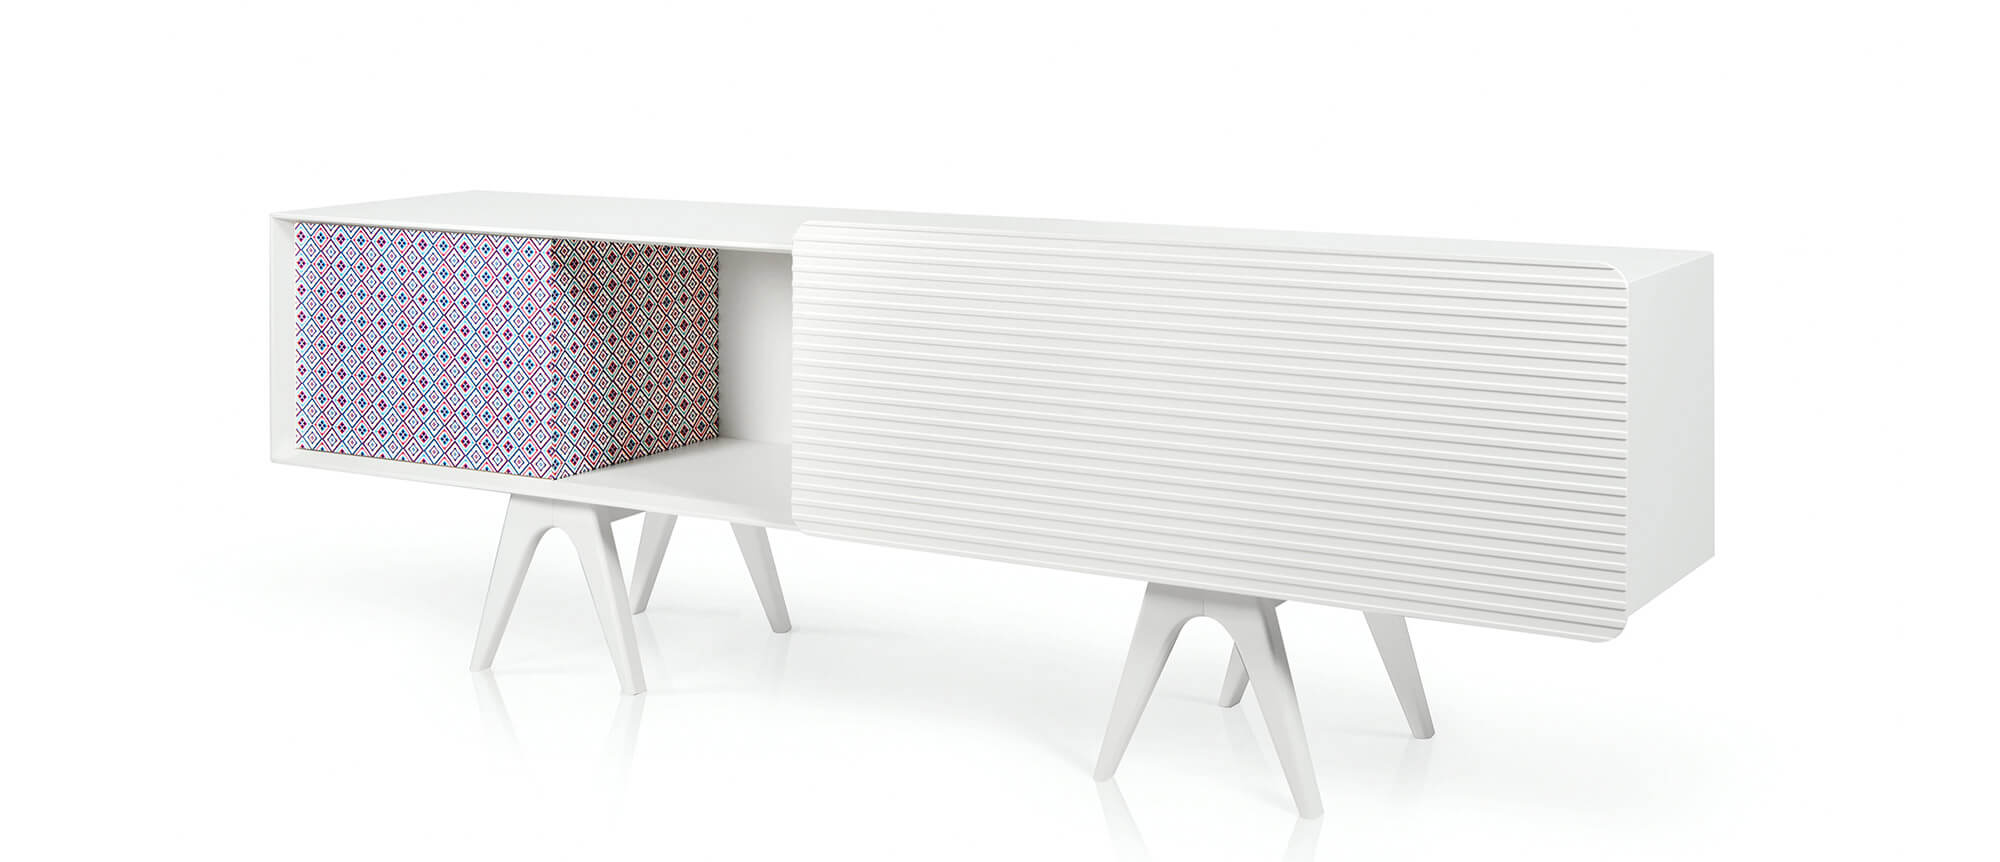 Bo-em B 003 sideboard in white lacquer and ethnic pattern. al2, art for living